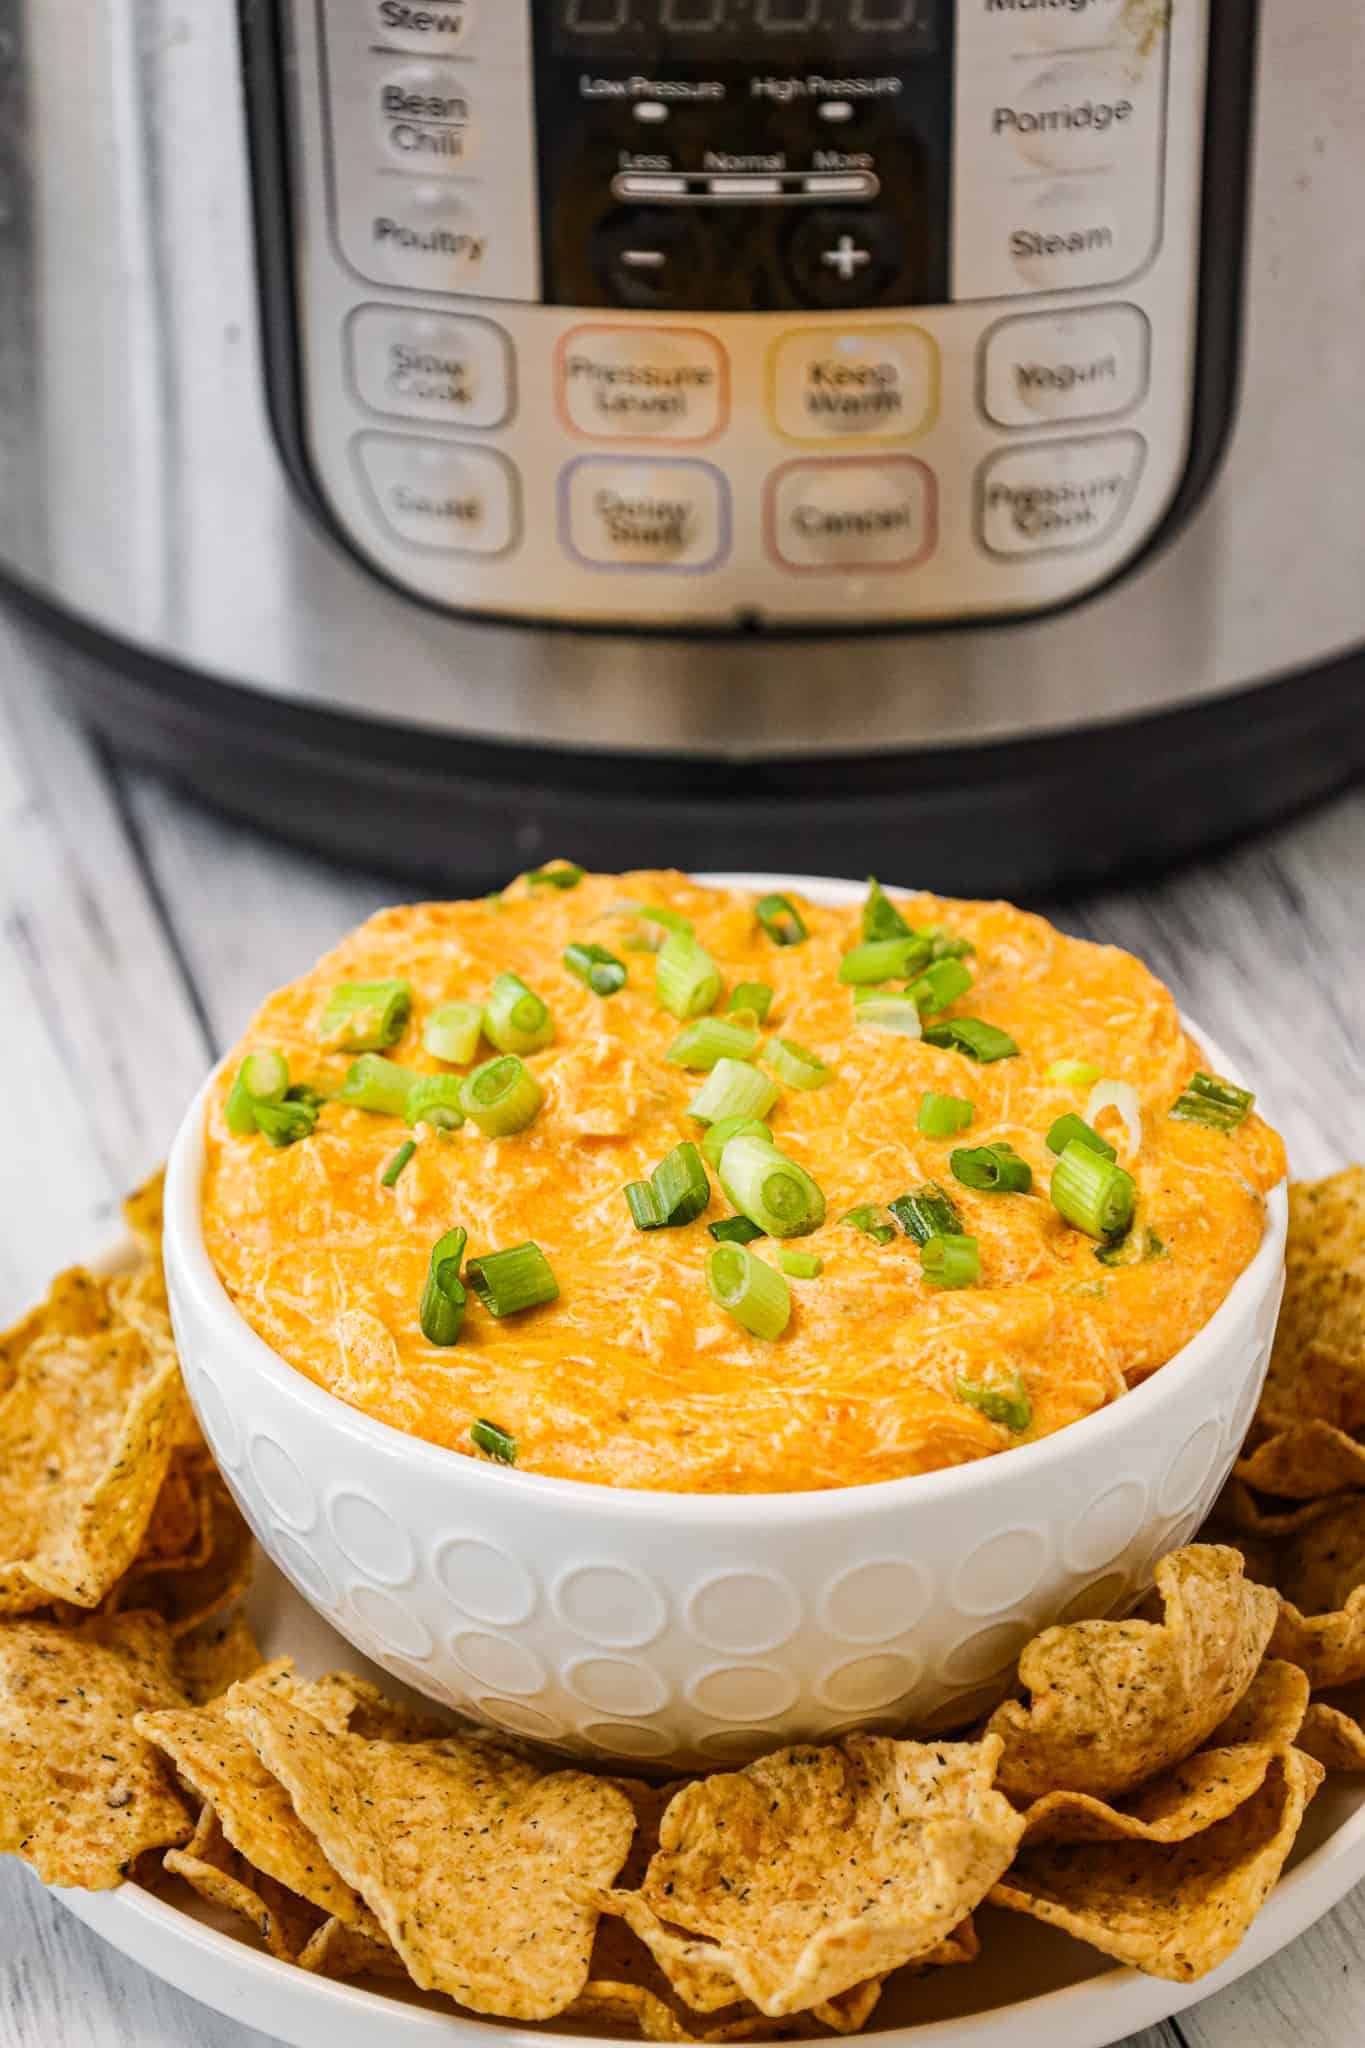 Instant Pot Buffalo Chicken Dip is a delicious pressure cooker party dip recipe loaded with shredded chicken, Buffalo sauce, ranch dressing, cream cheese and a blend of shredded cheeses.